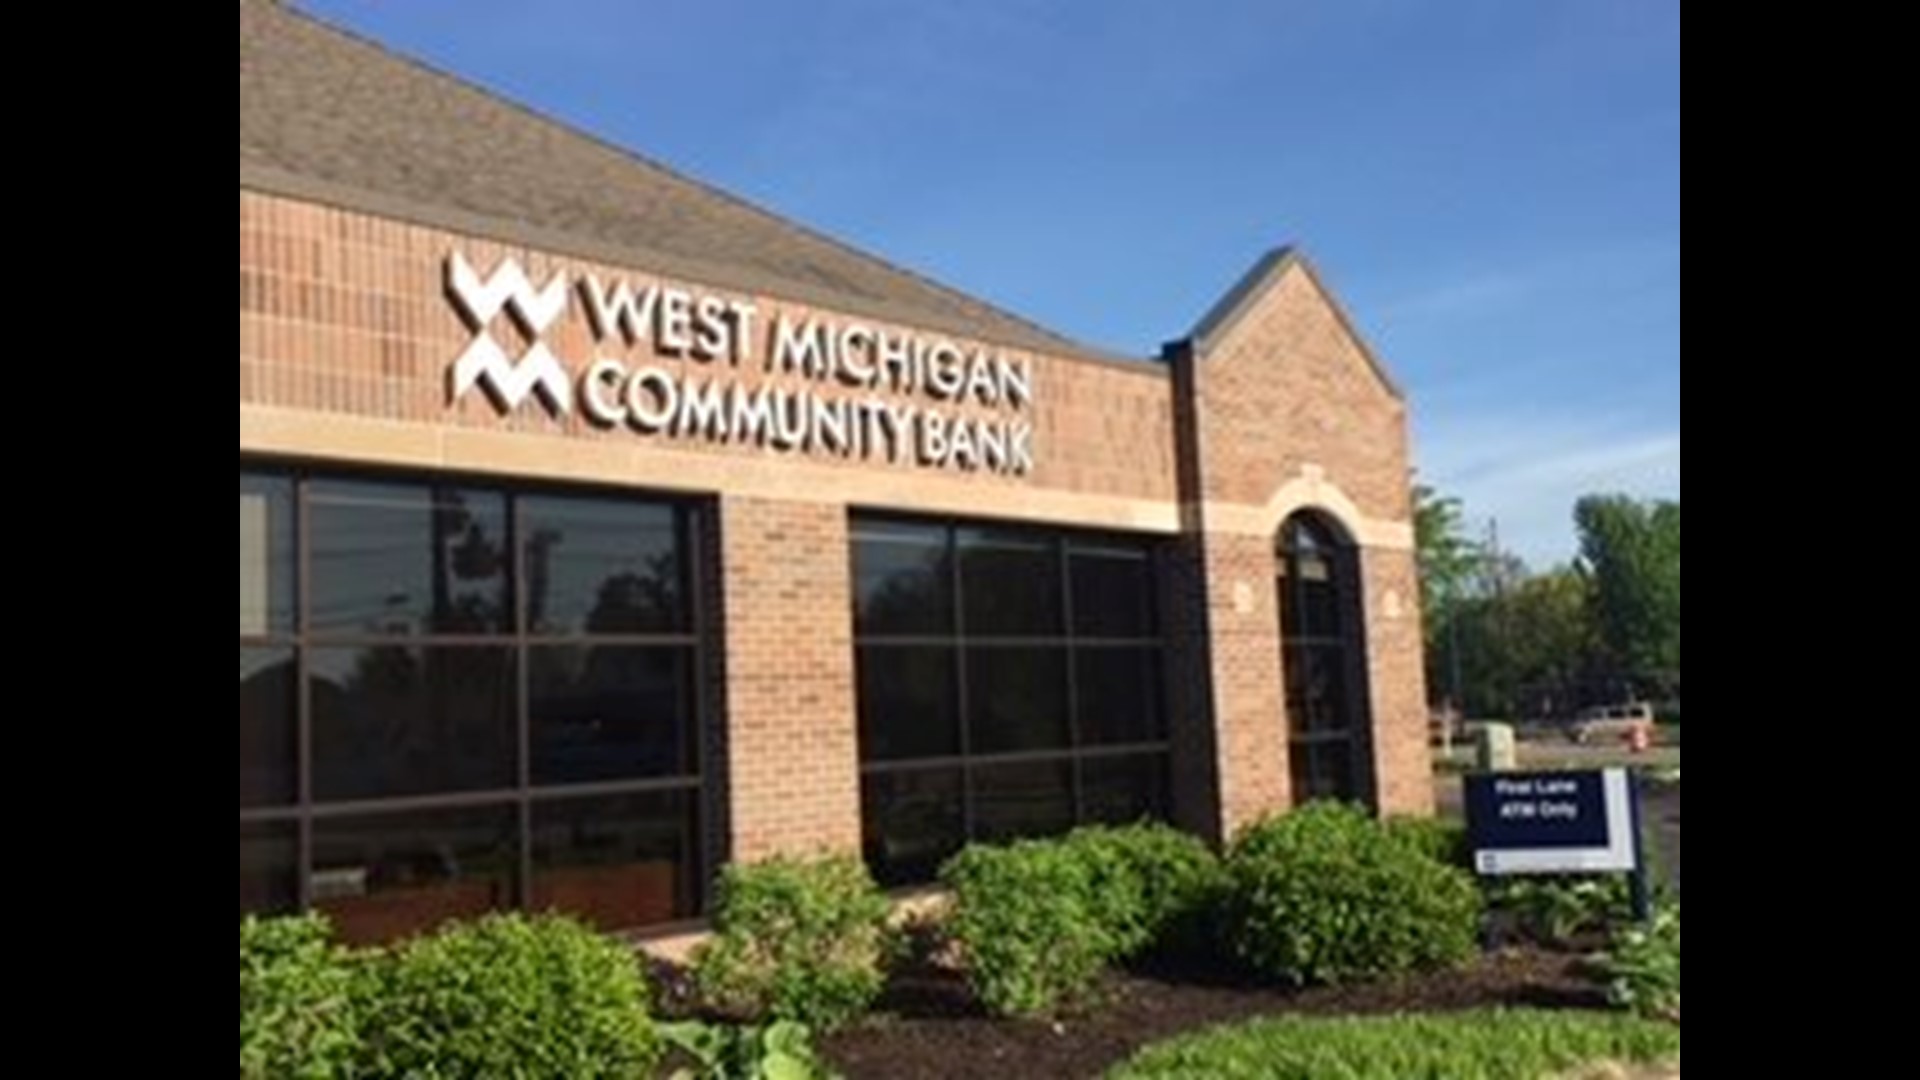 West Michigan Community Bank is just what its name implies, a bank that serves the community.